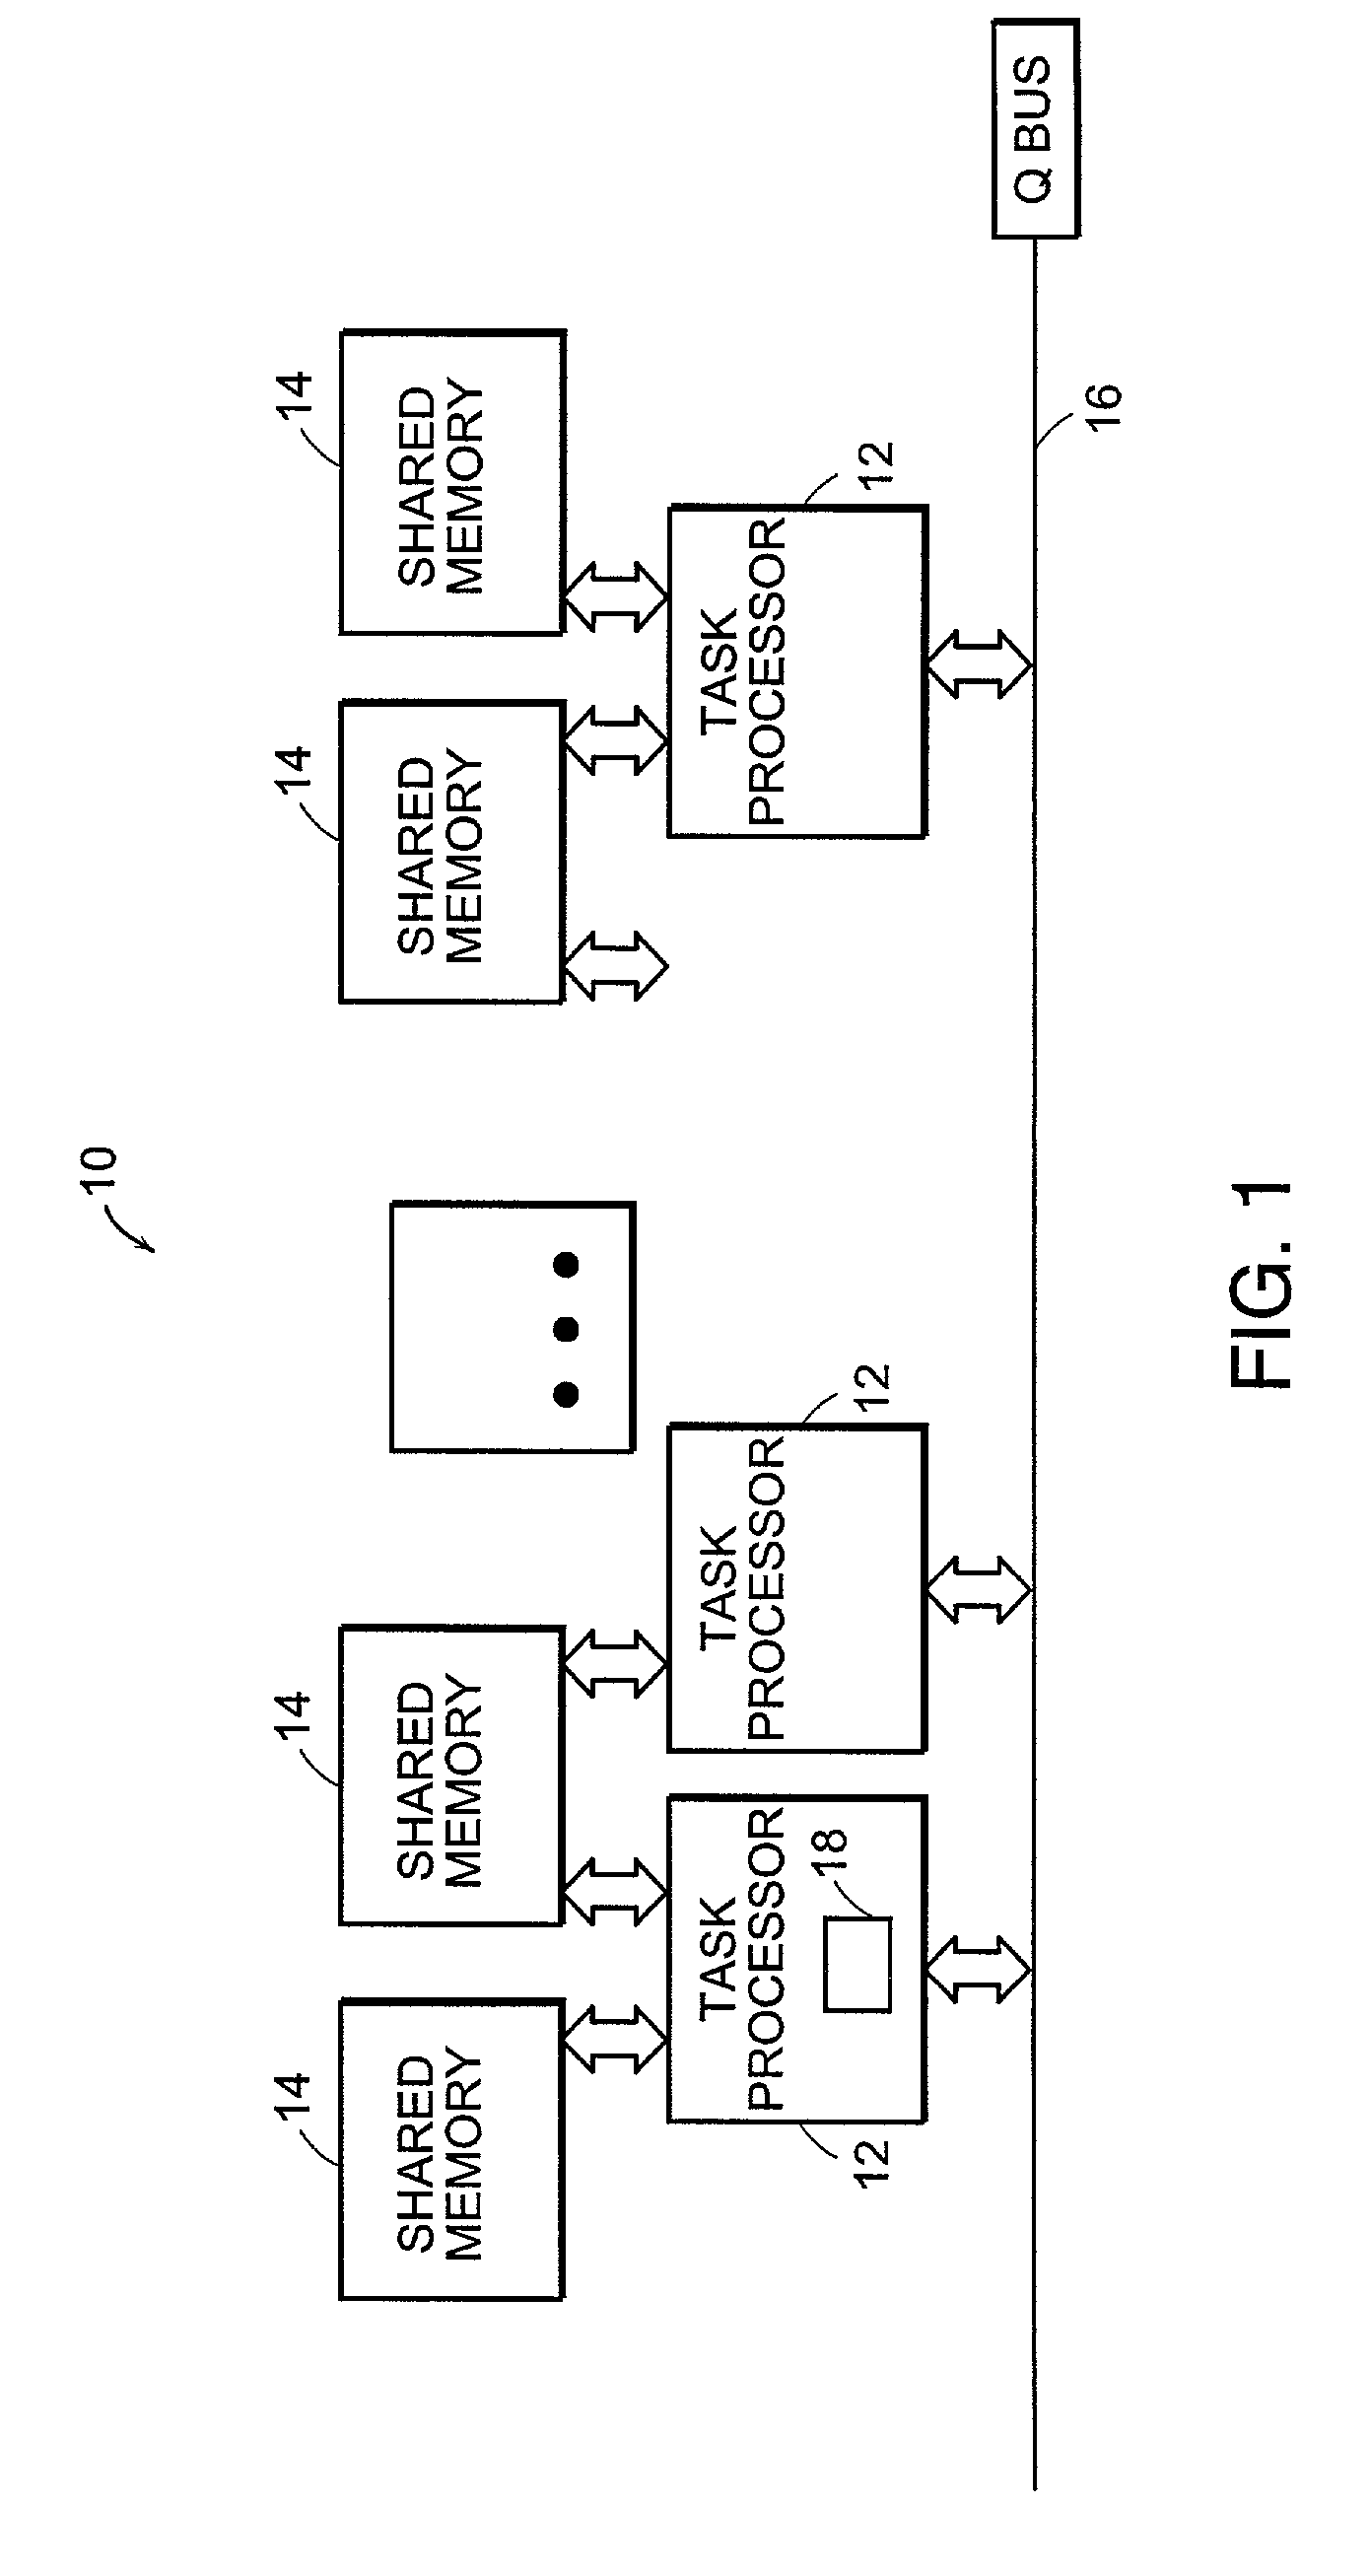 Compiler for multiple processor and distributed memory architectures